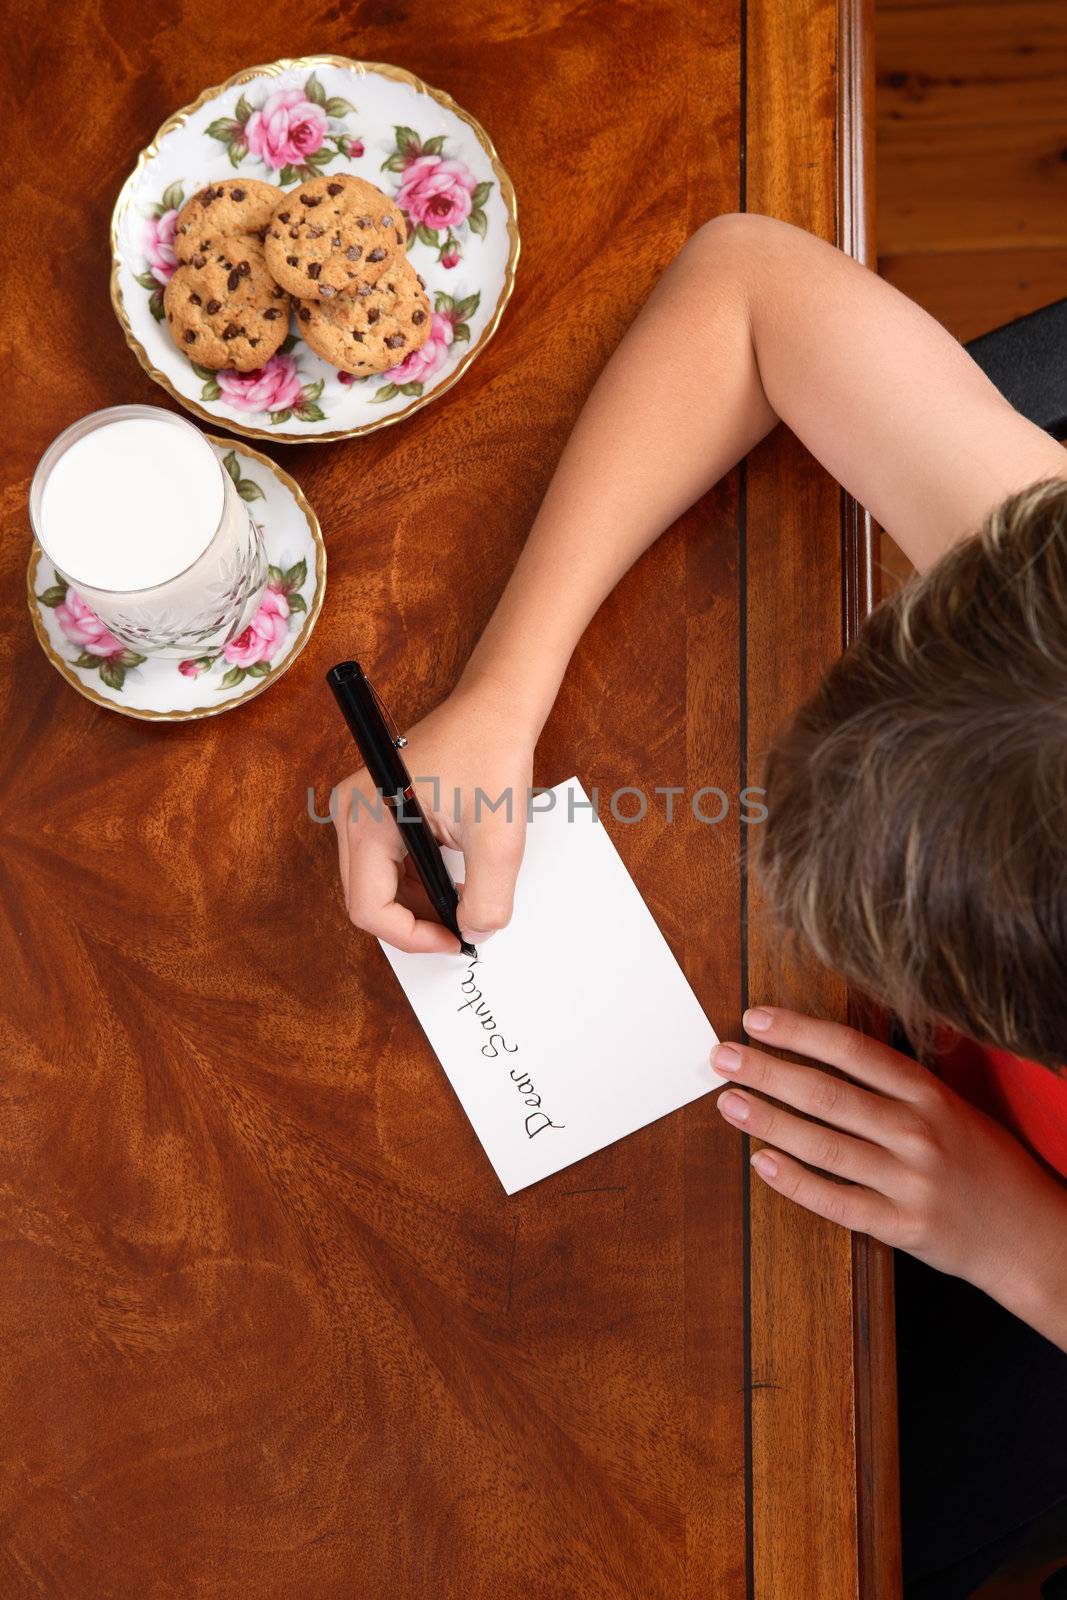 Child writing a letter by lovleah